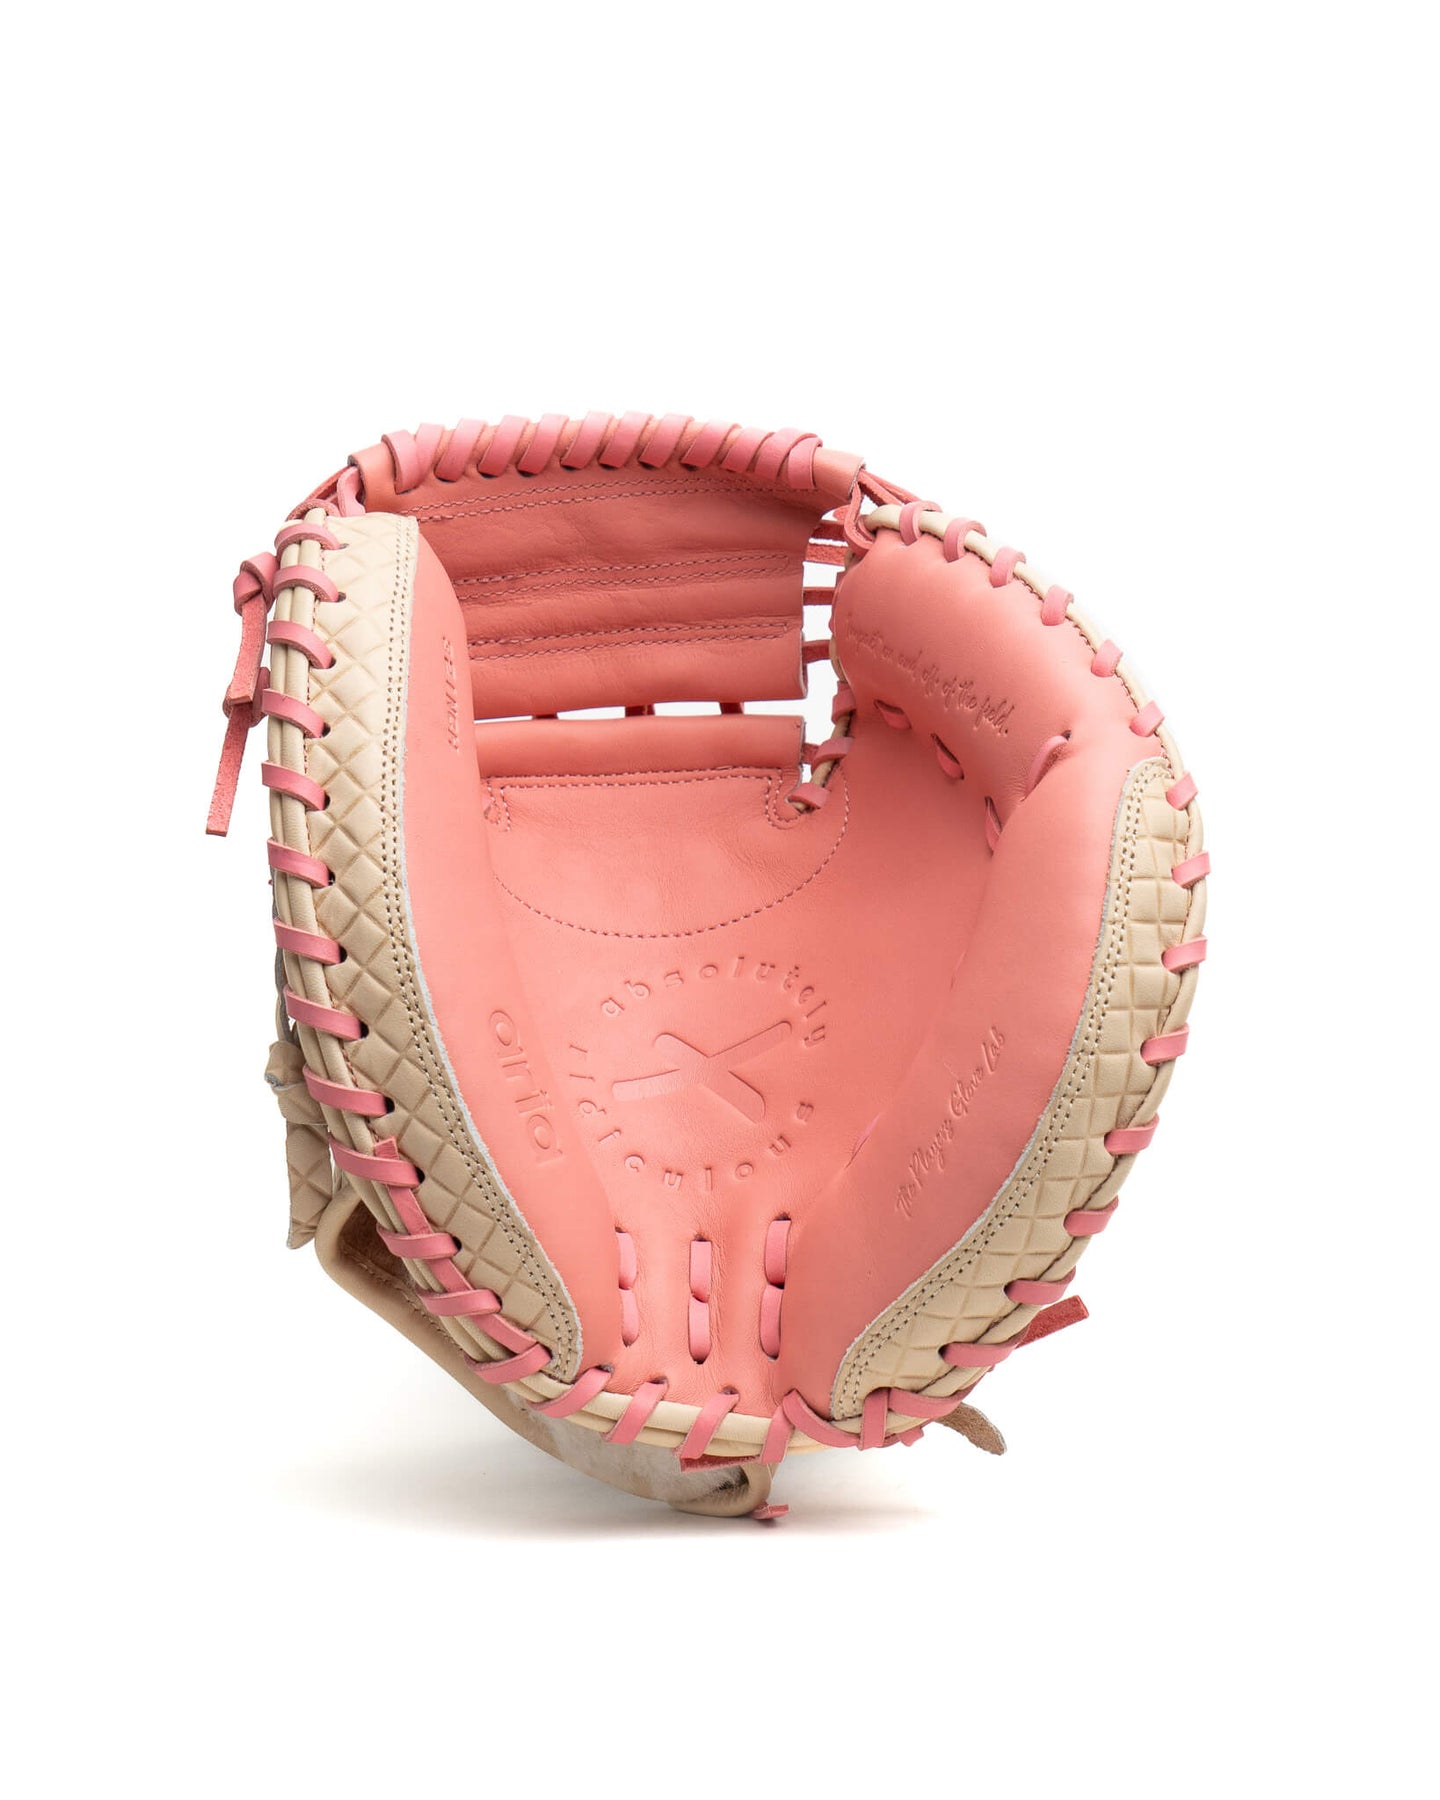 ice cream catchers glove  strawberry – Absolutely Ridiculous innovation  for Athletes